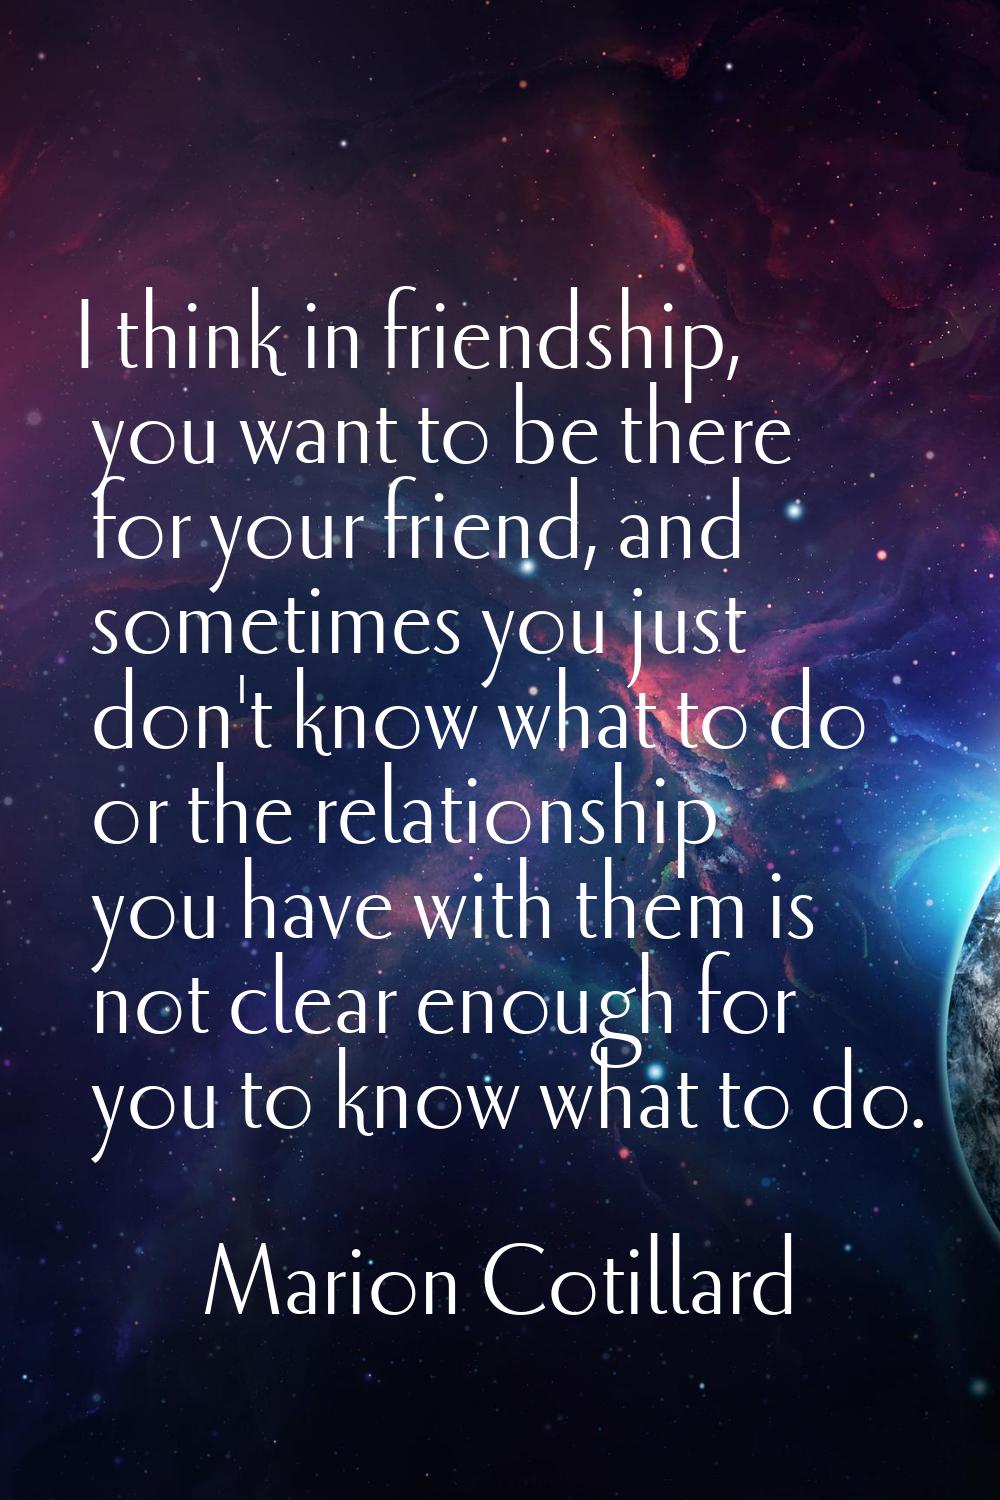 I think in friendship, you want to be there for your friend, and sometimes you just don't know what